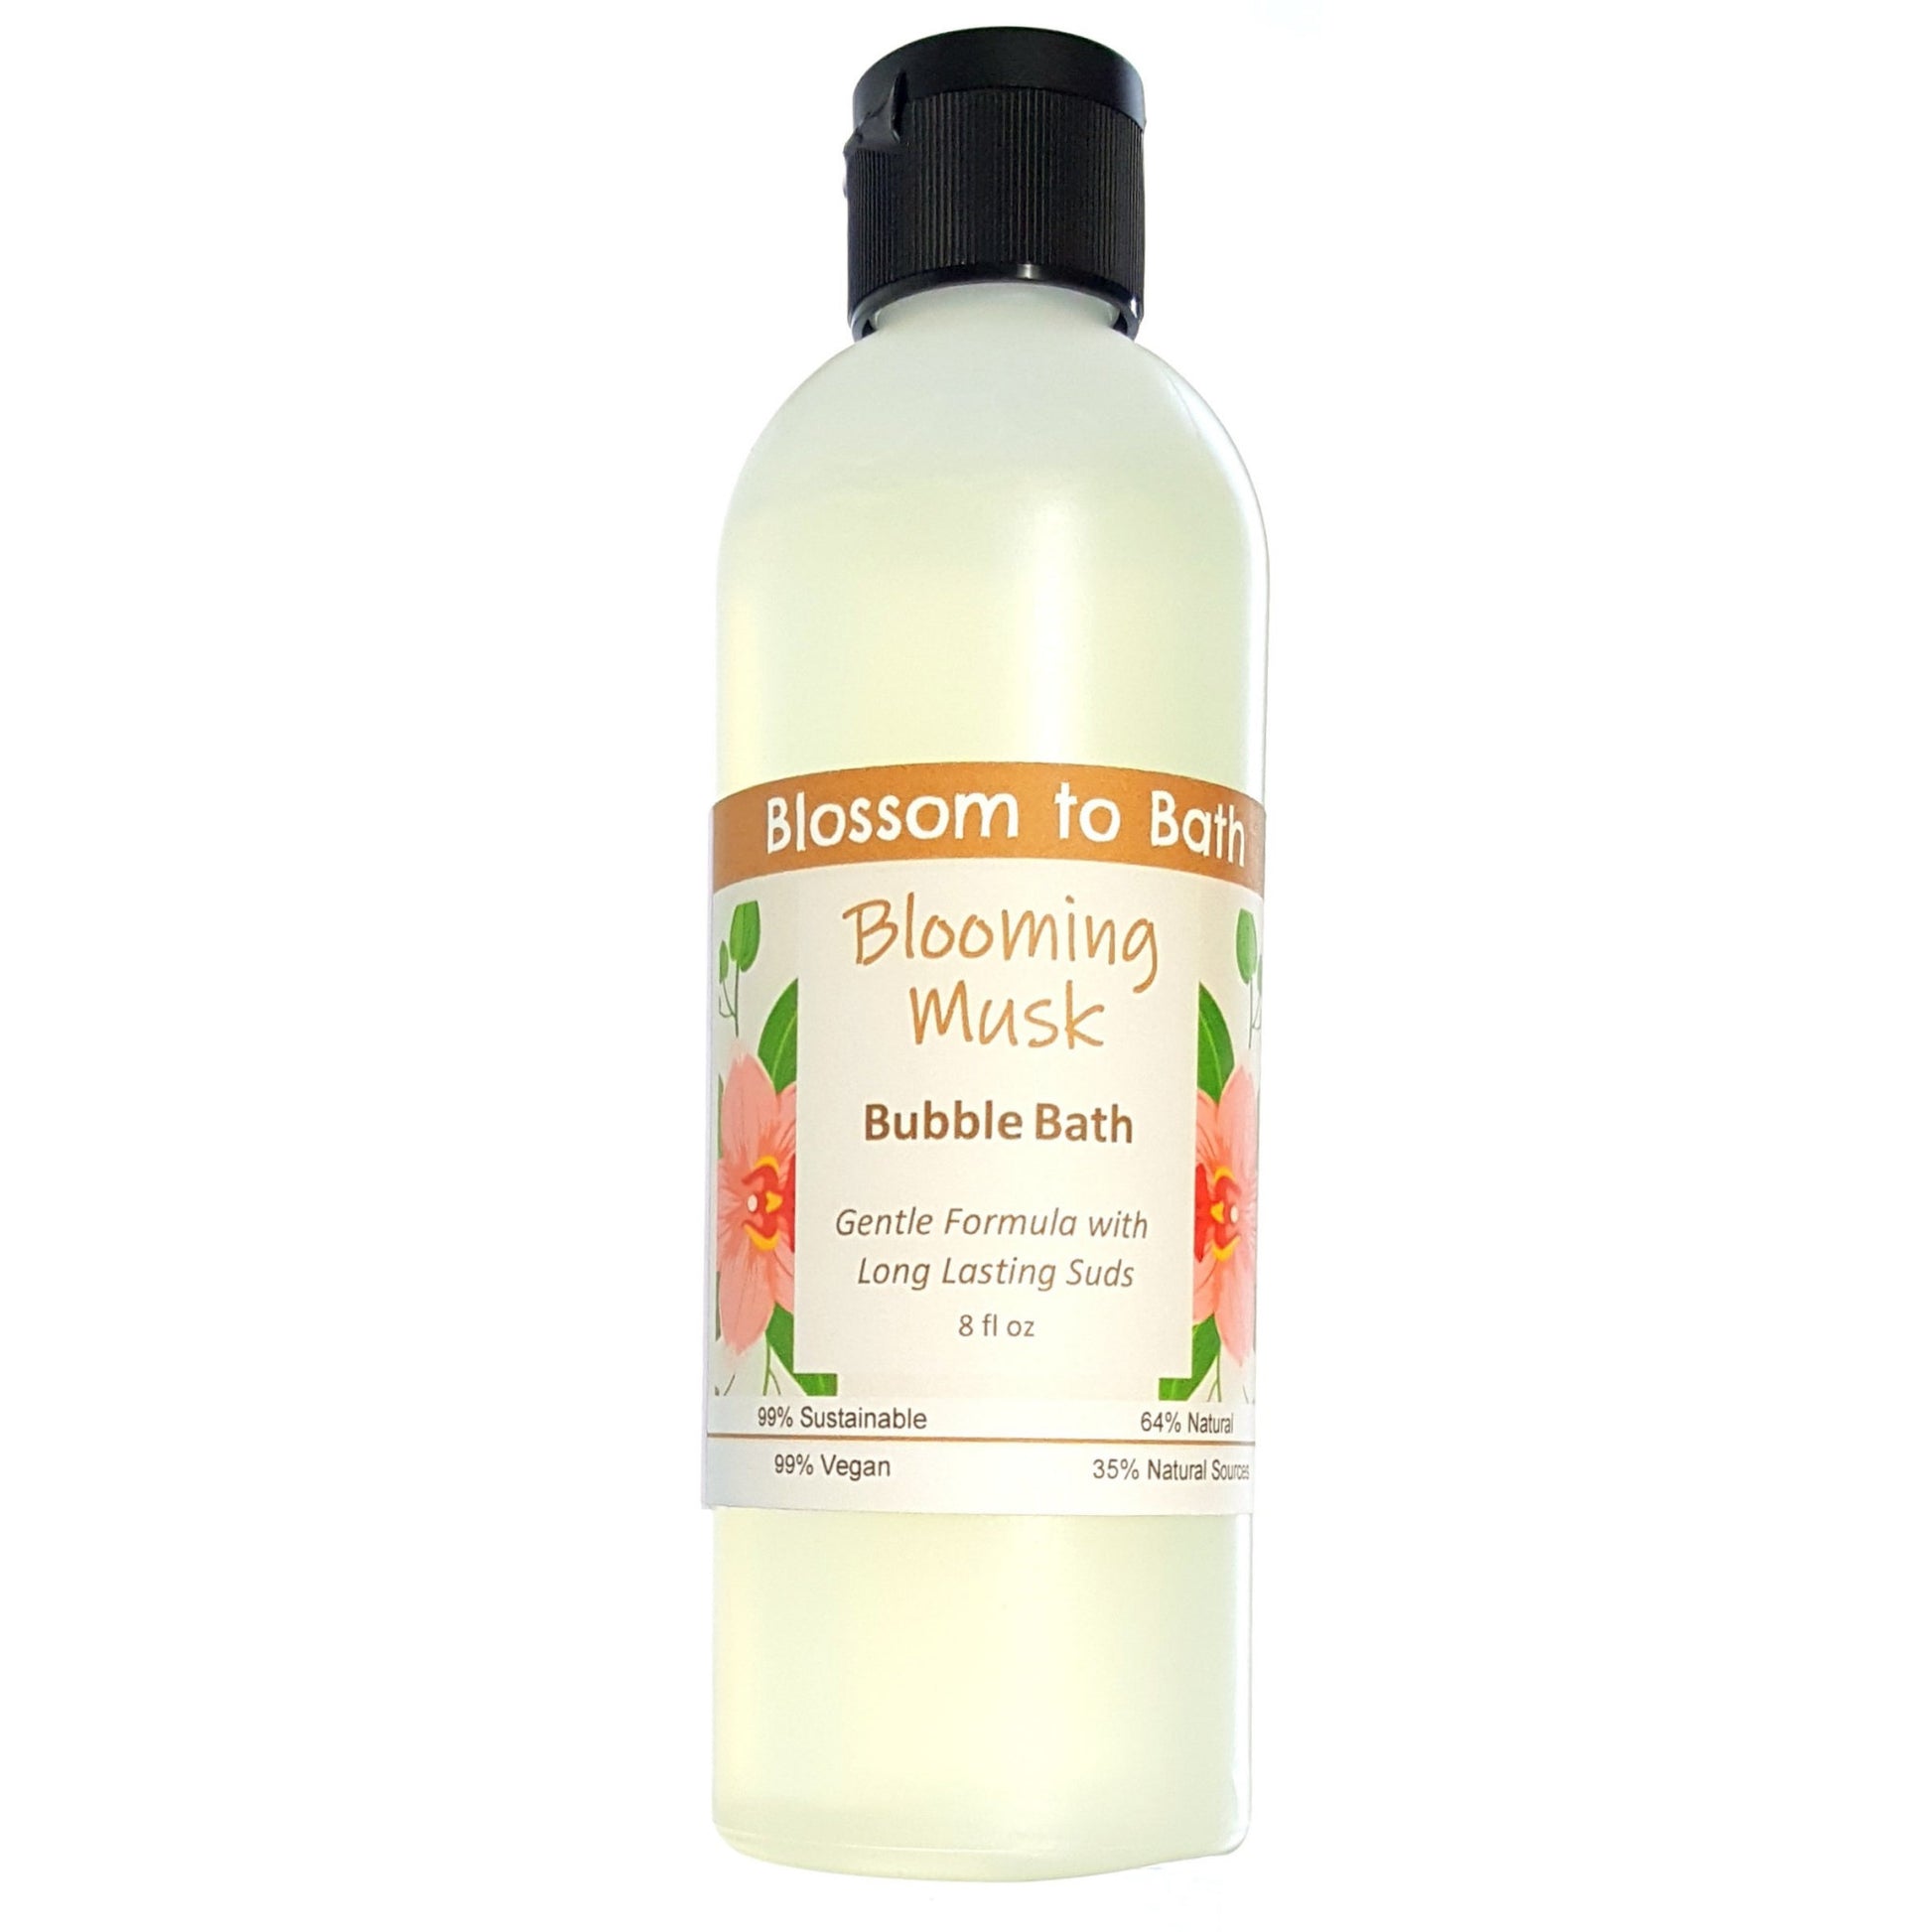 Buy Blossom to Bath Blooming Musk Bubble Bath from Flowersong Soap Studio.  Lively, long lasting  bubbles in a gentle plant based formula for maximum relaxation time  A sensual floral and musk scent that is subtle and feminine.